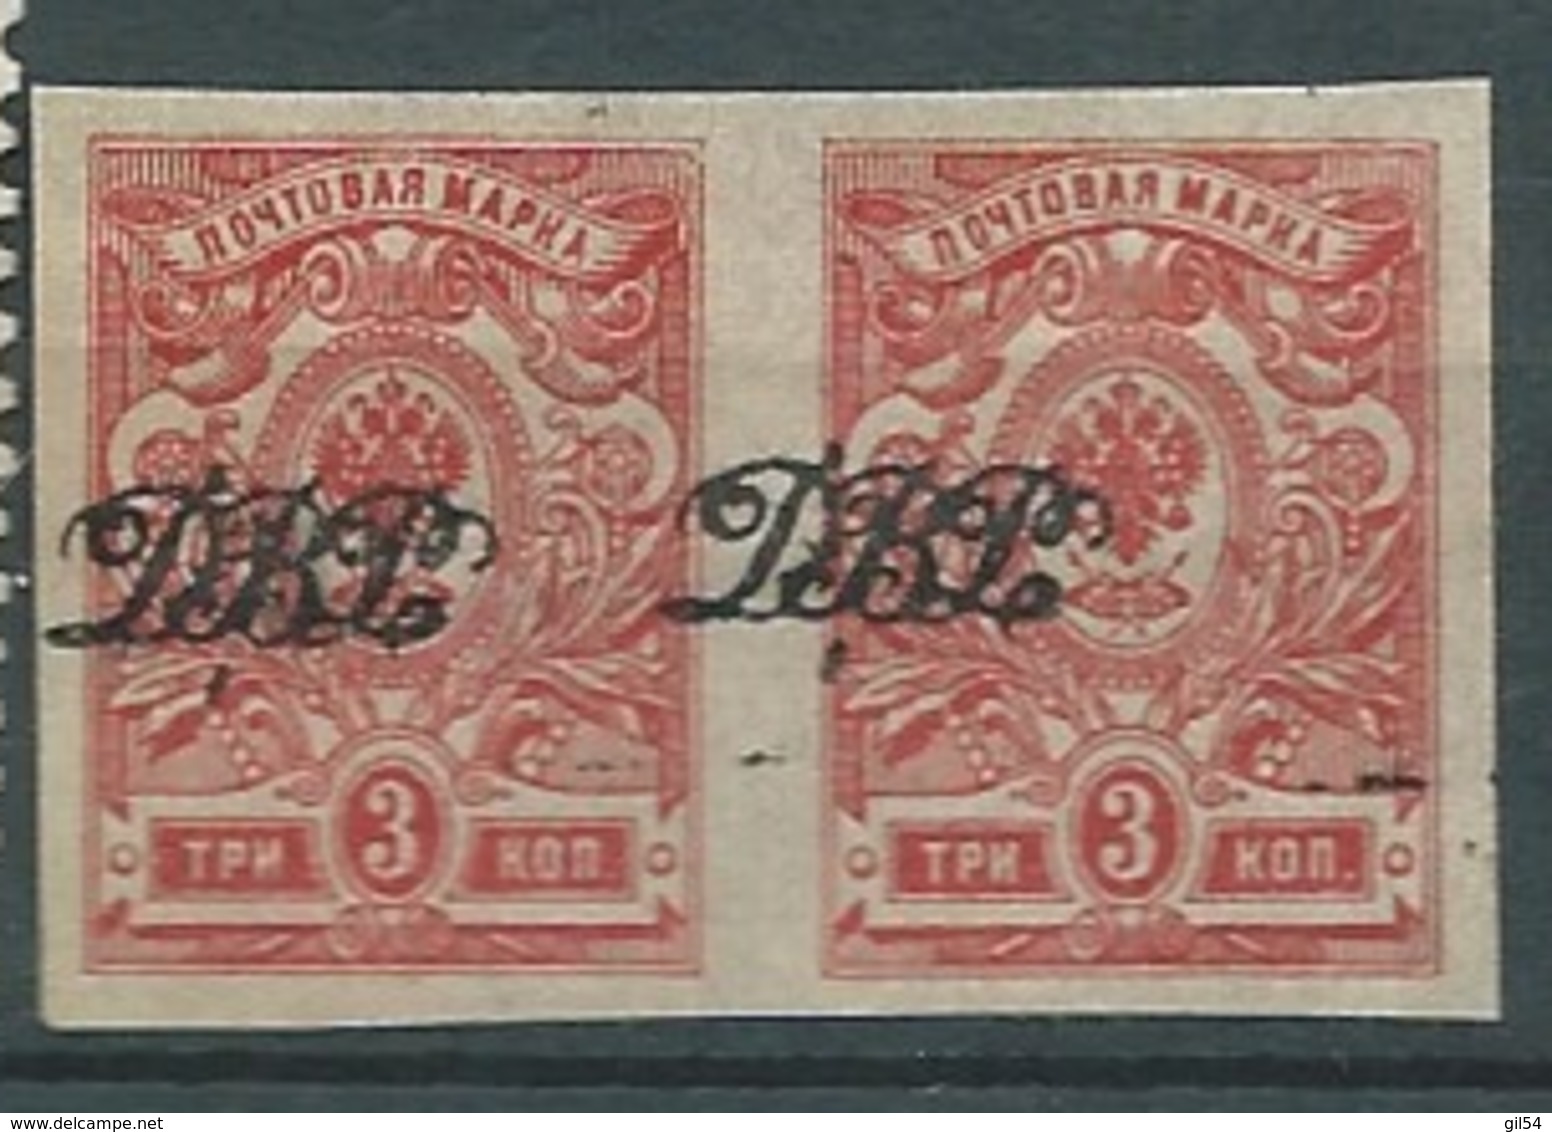 Russie Vladivostok   - Yvert N° 3 (*)  Paire Surcharge à Cheval  -  Pa 18213 - Siberia And Far East